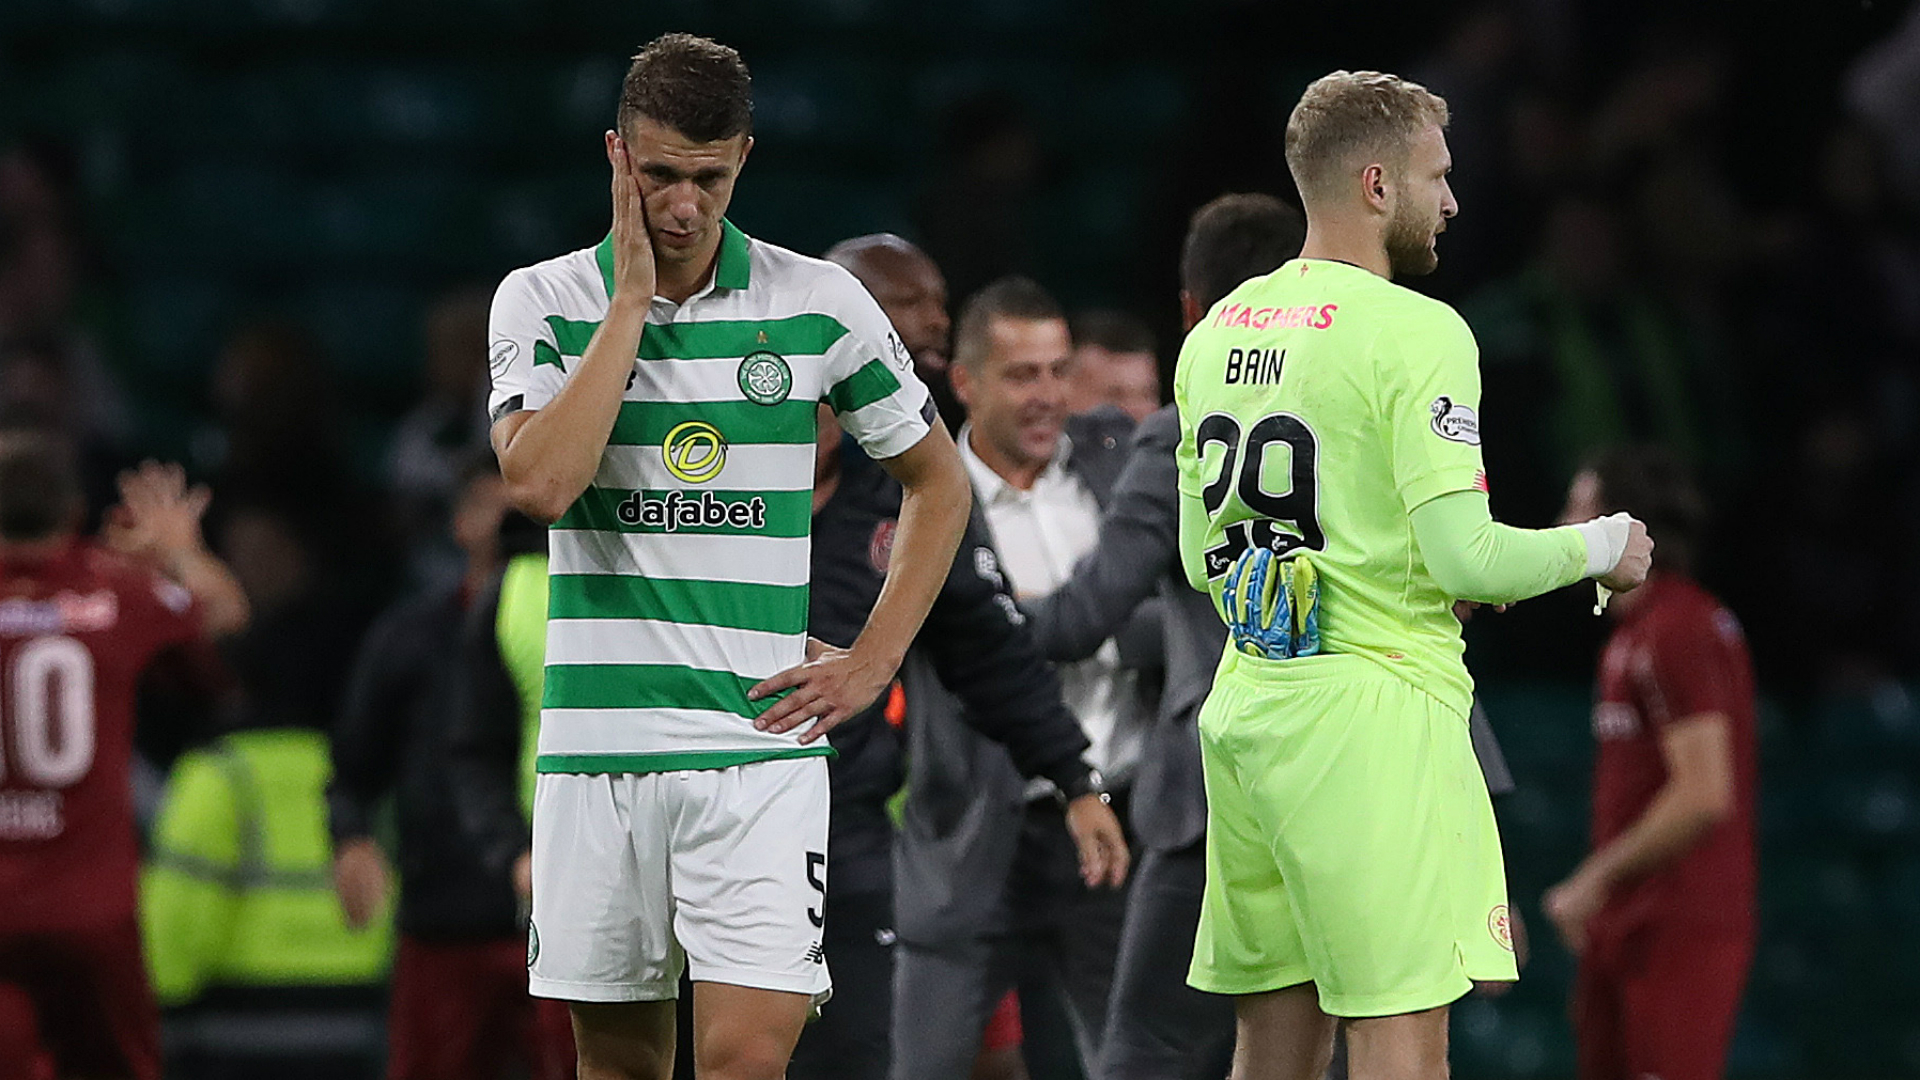 Celtic boss Neil Lennon refused to look for excuses after his side lost to CFR Cluj in Champions League qualifying.